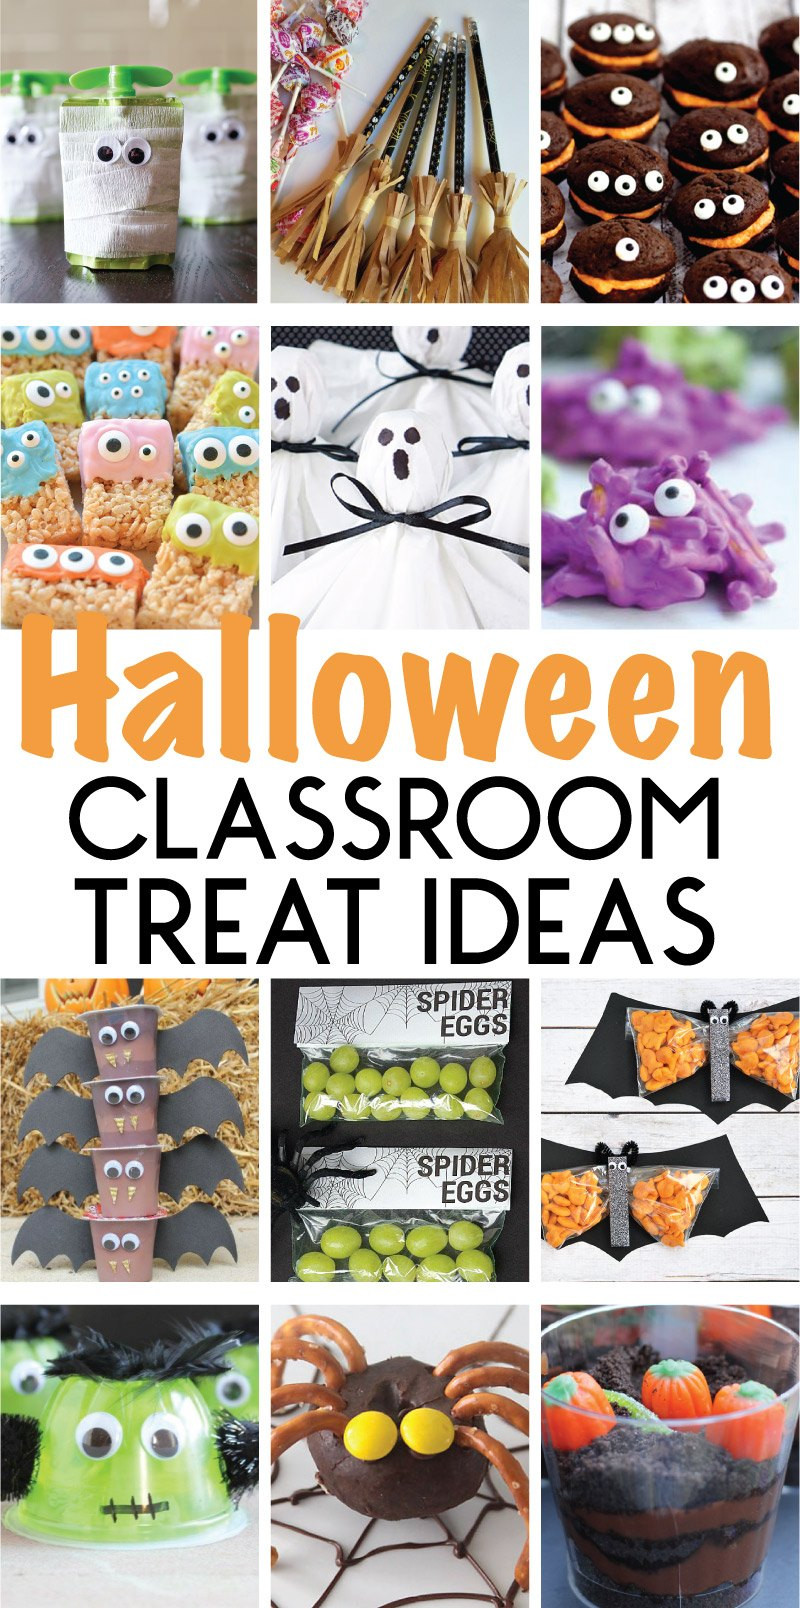 Halloween Party Treat Ideas
 12 Halloween Class Party Ideas and Activities on Love the Day